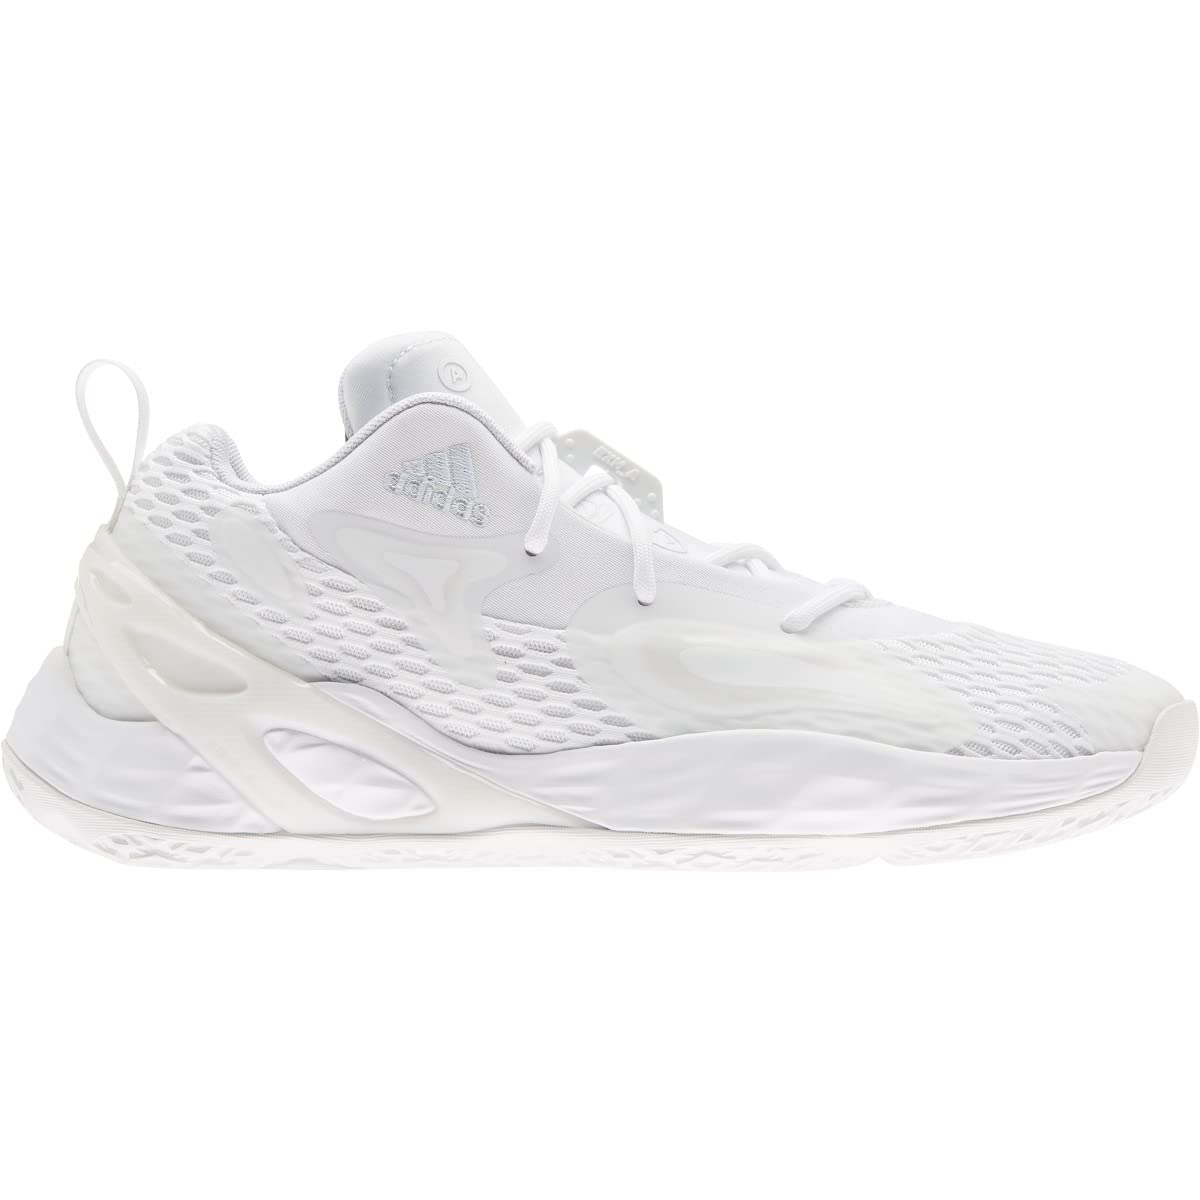 Total 79+ imagen adidas basketball white shoes - Abzlocal.mx